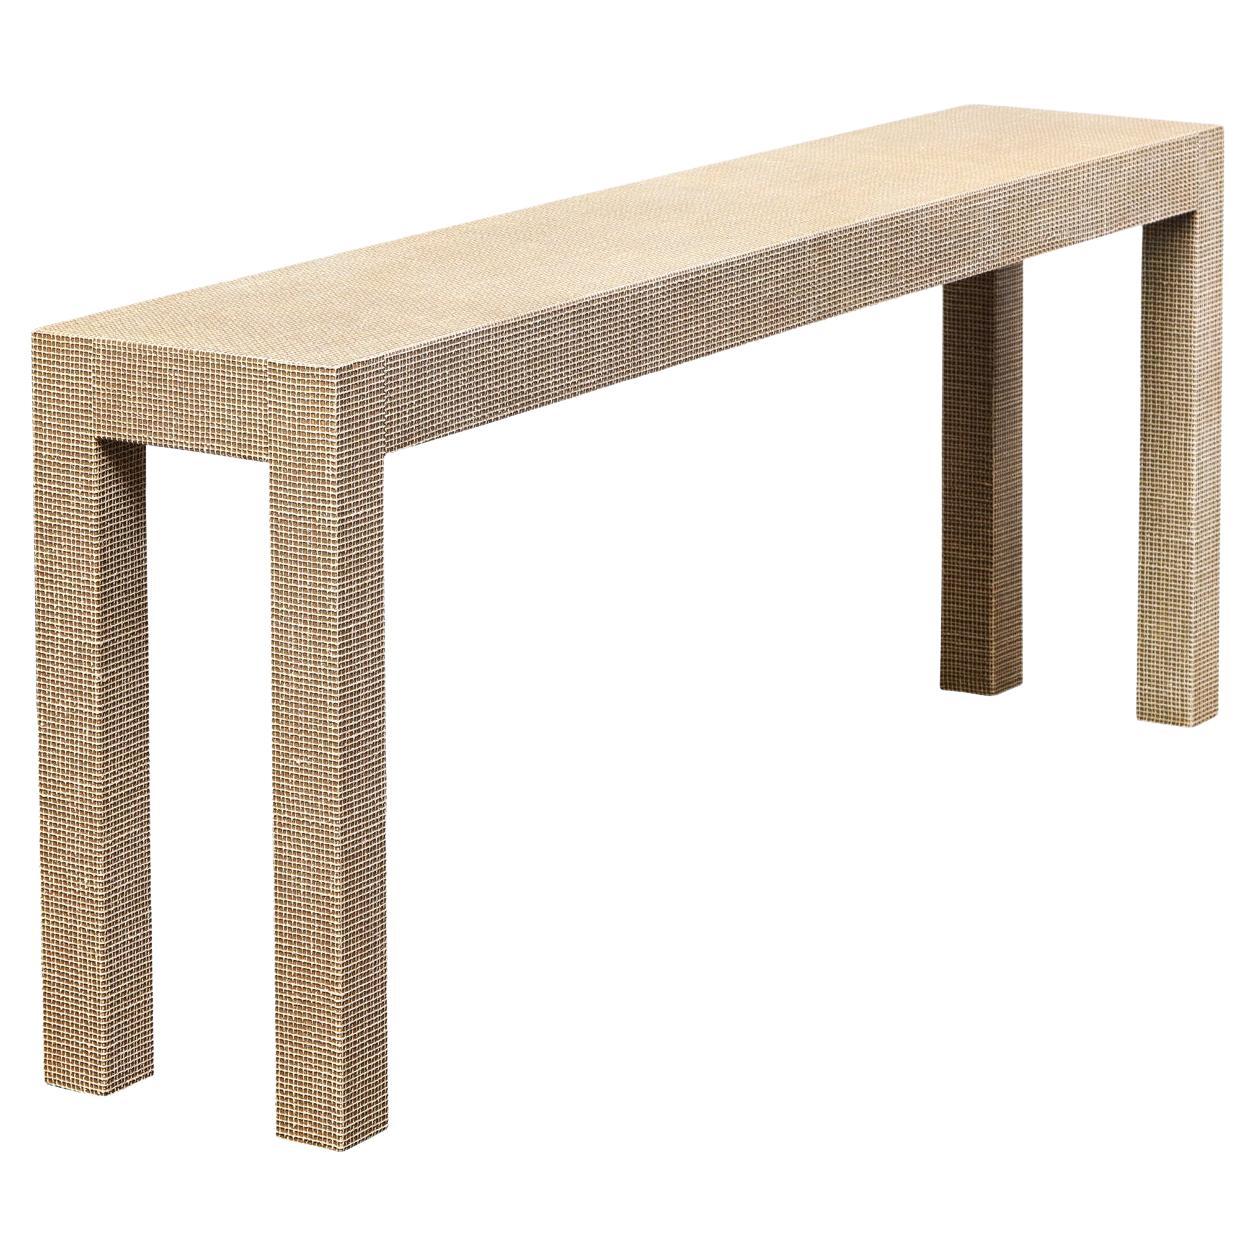 Lobel Originals Custom Console Table in 2-Tone Lacquered Linen, Made to Order For Sale